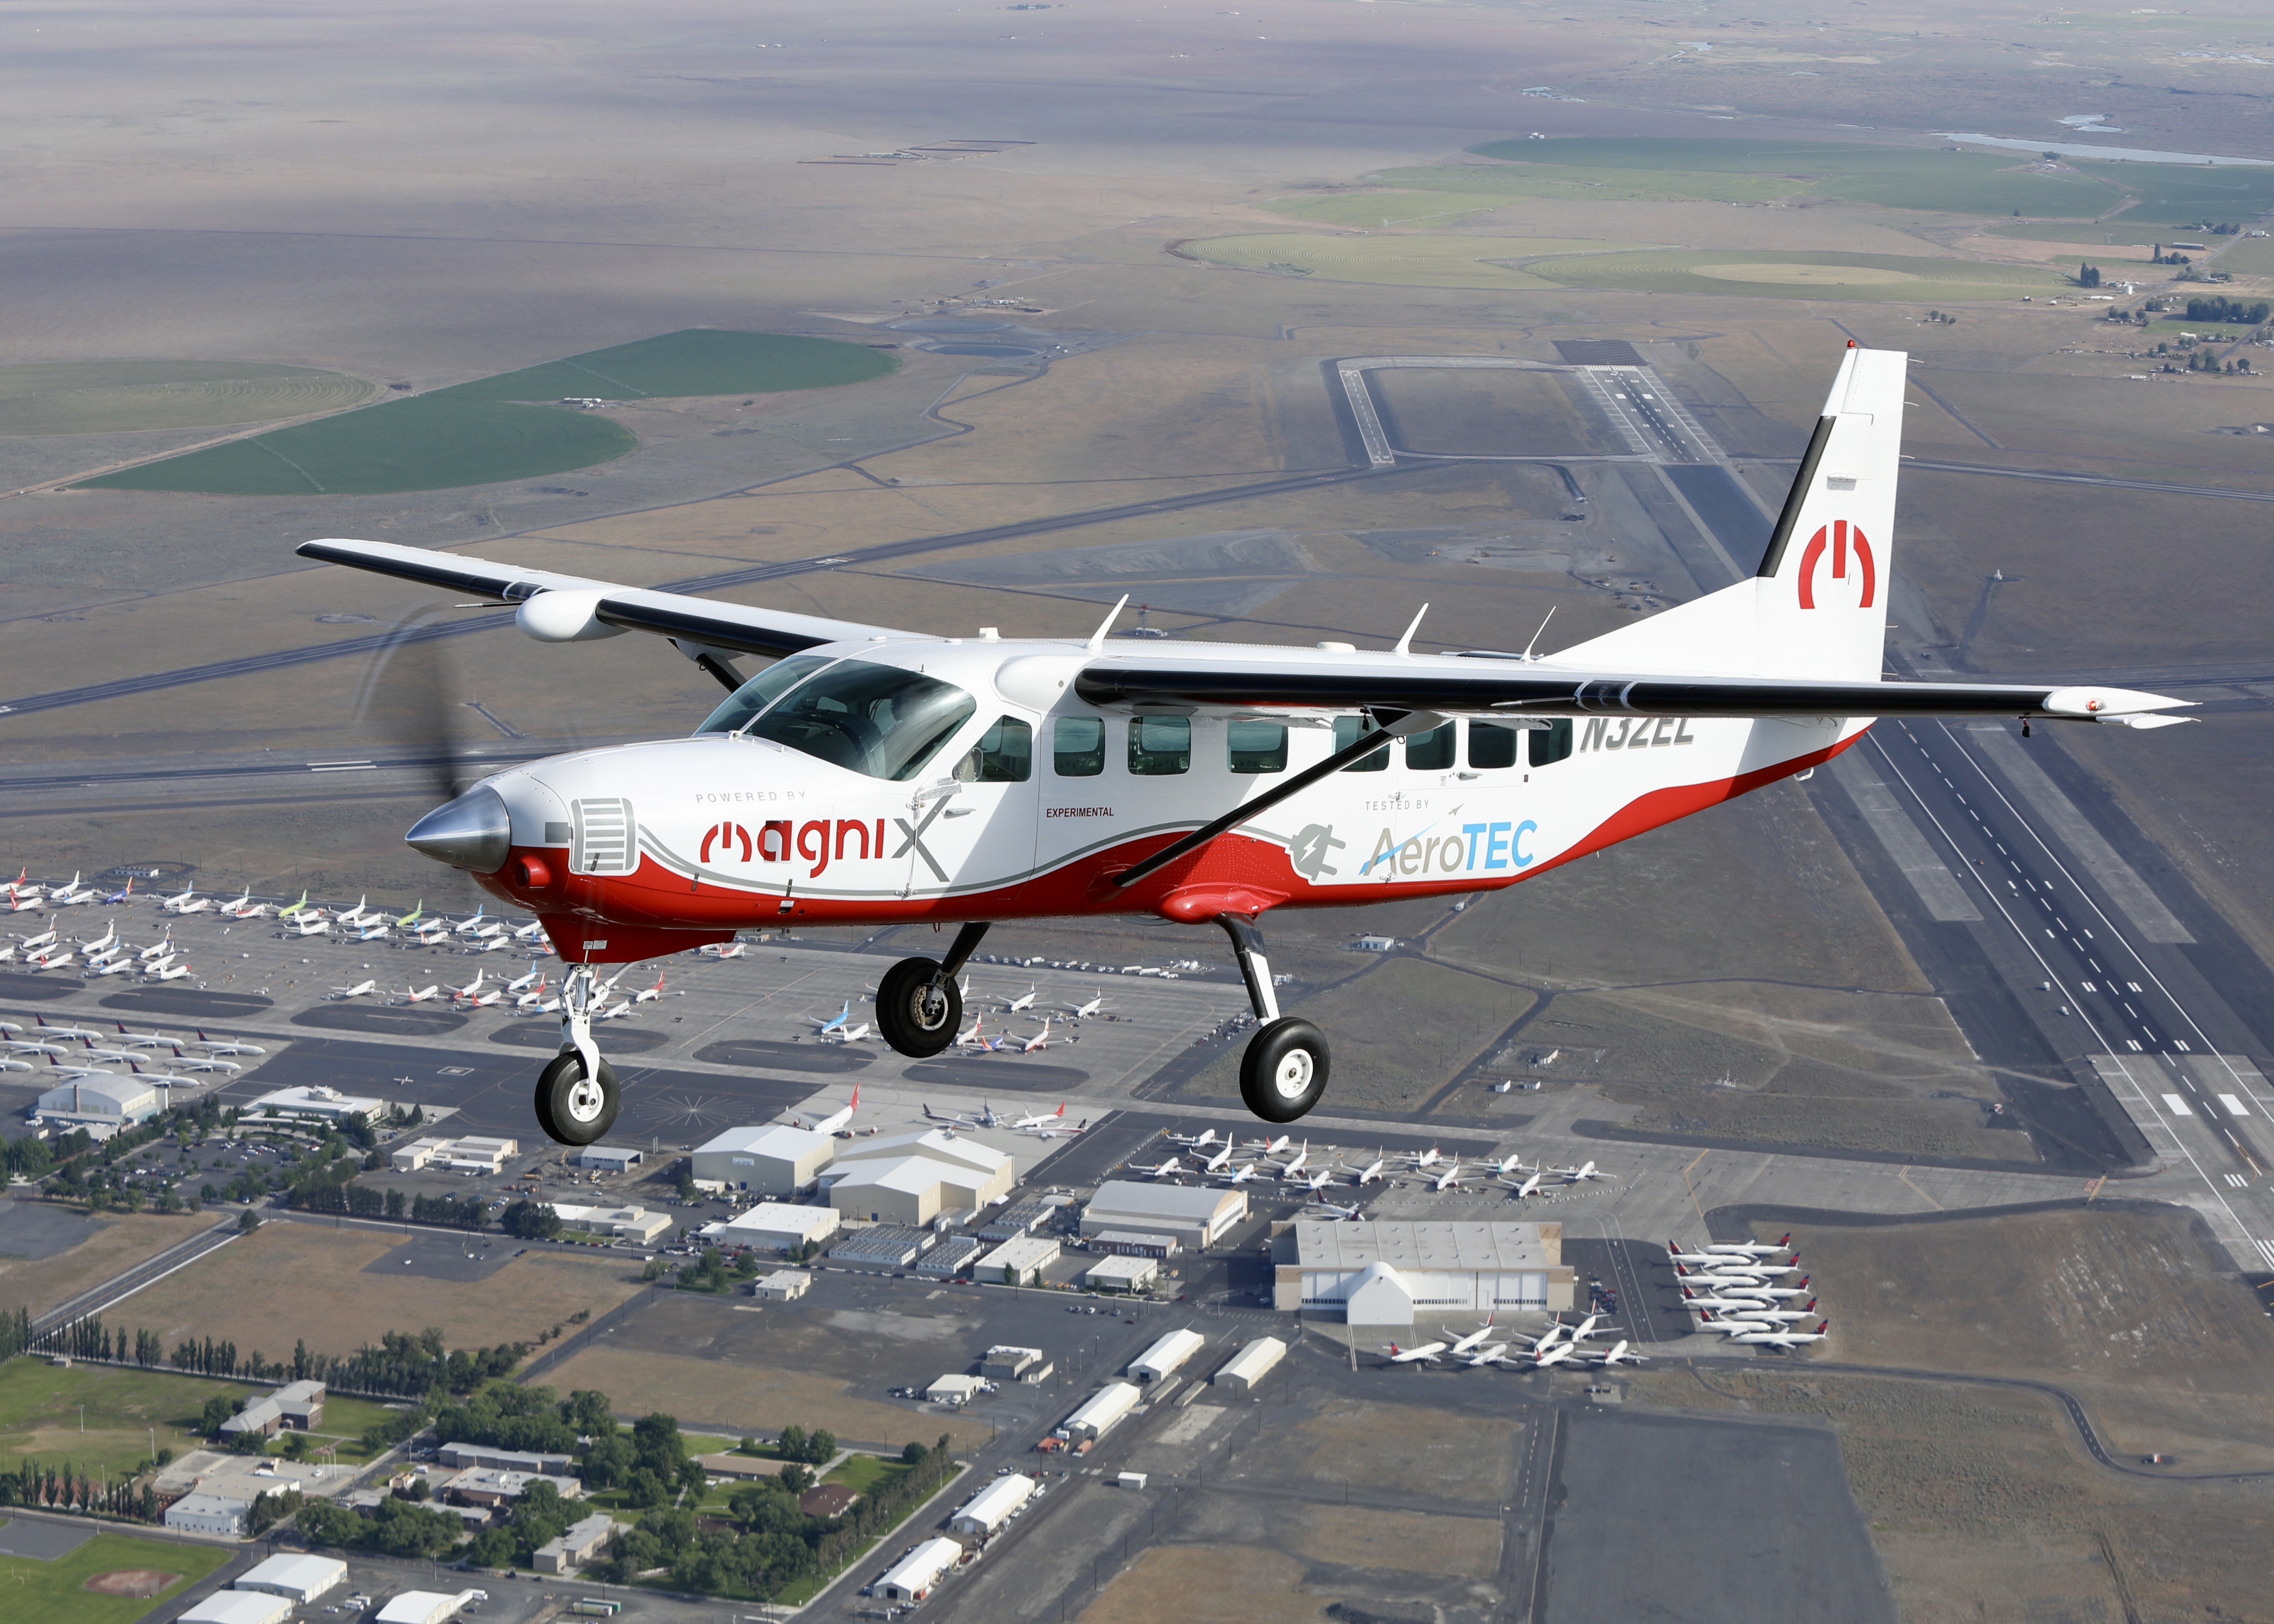 A retrofitted Cessna Grand Caravan takes an all electric flight.